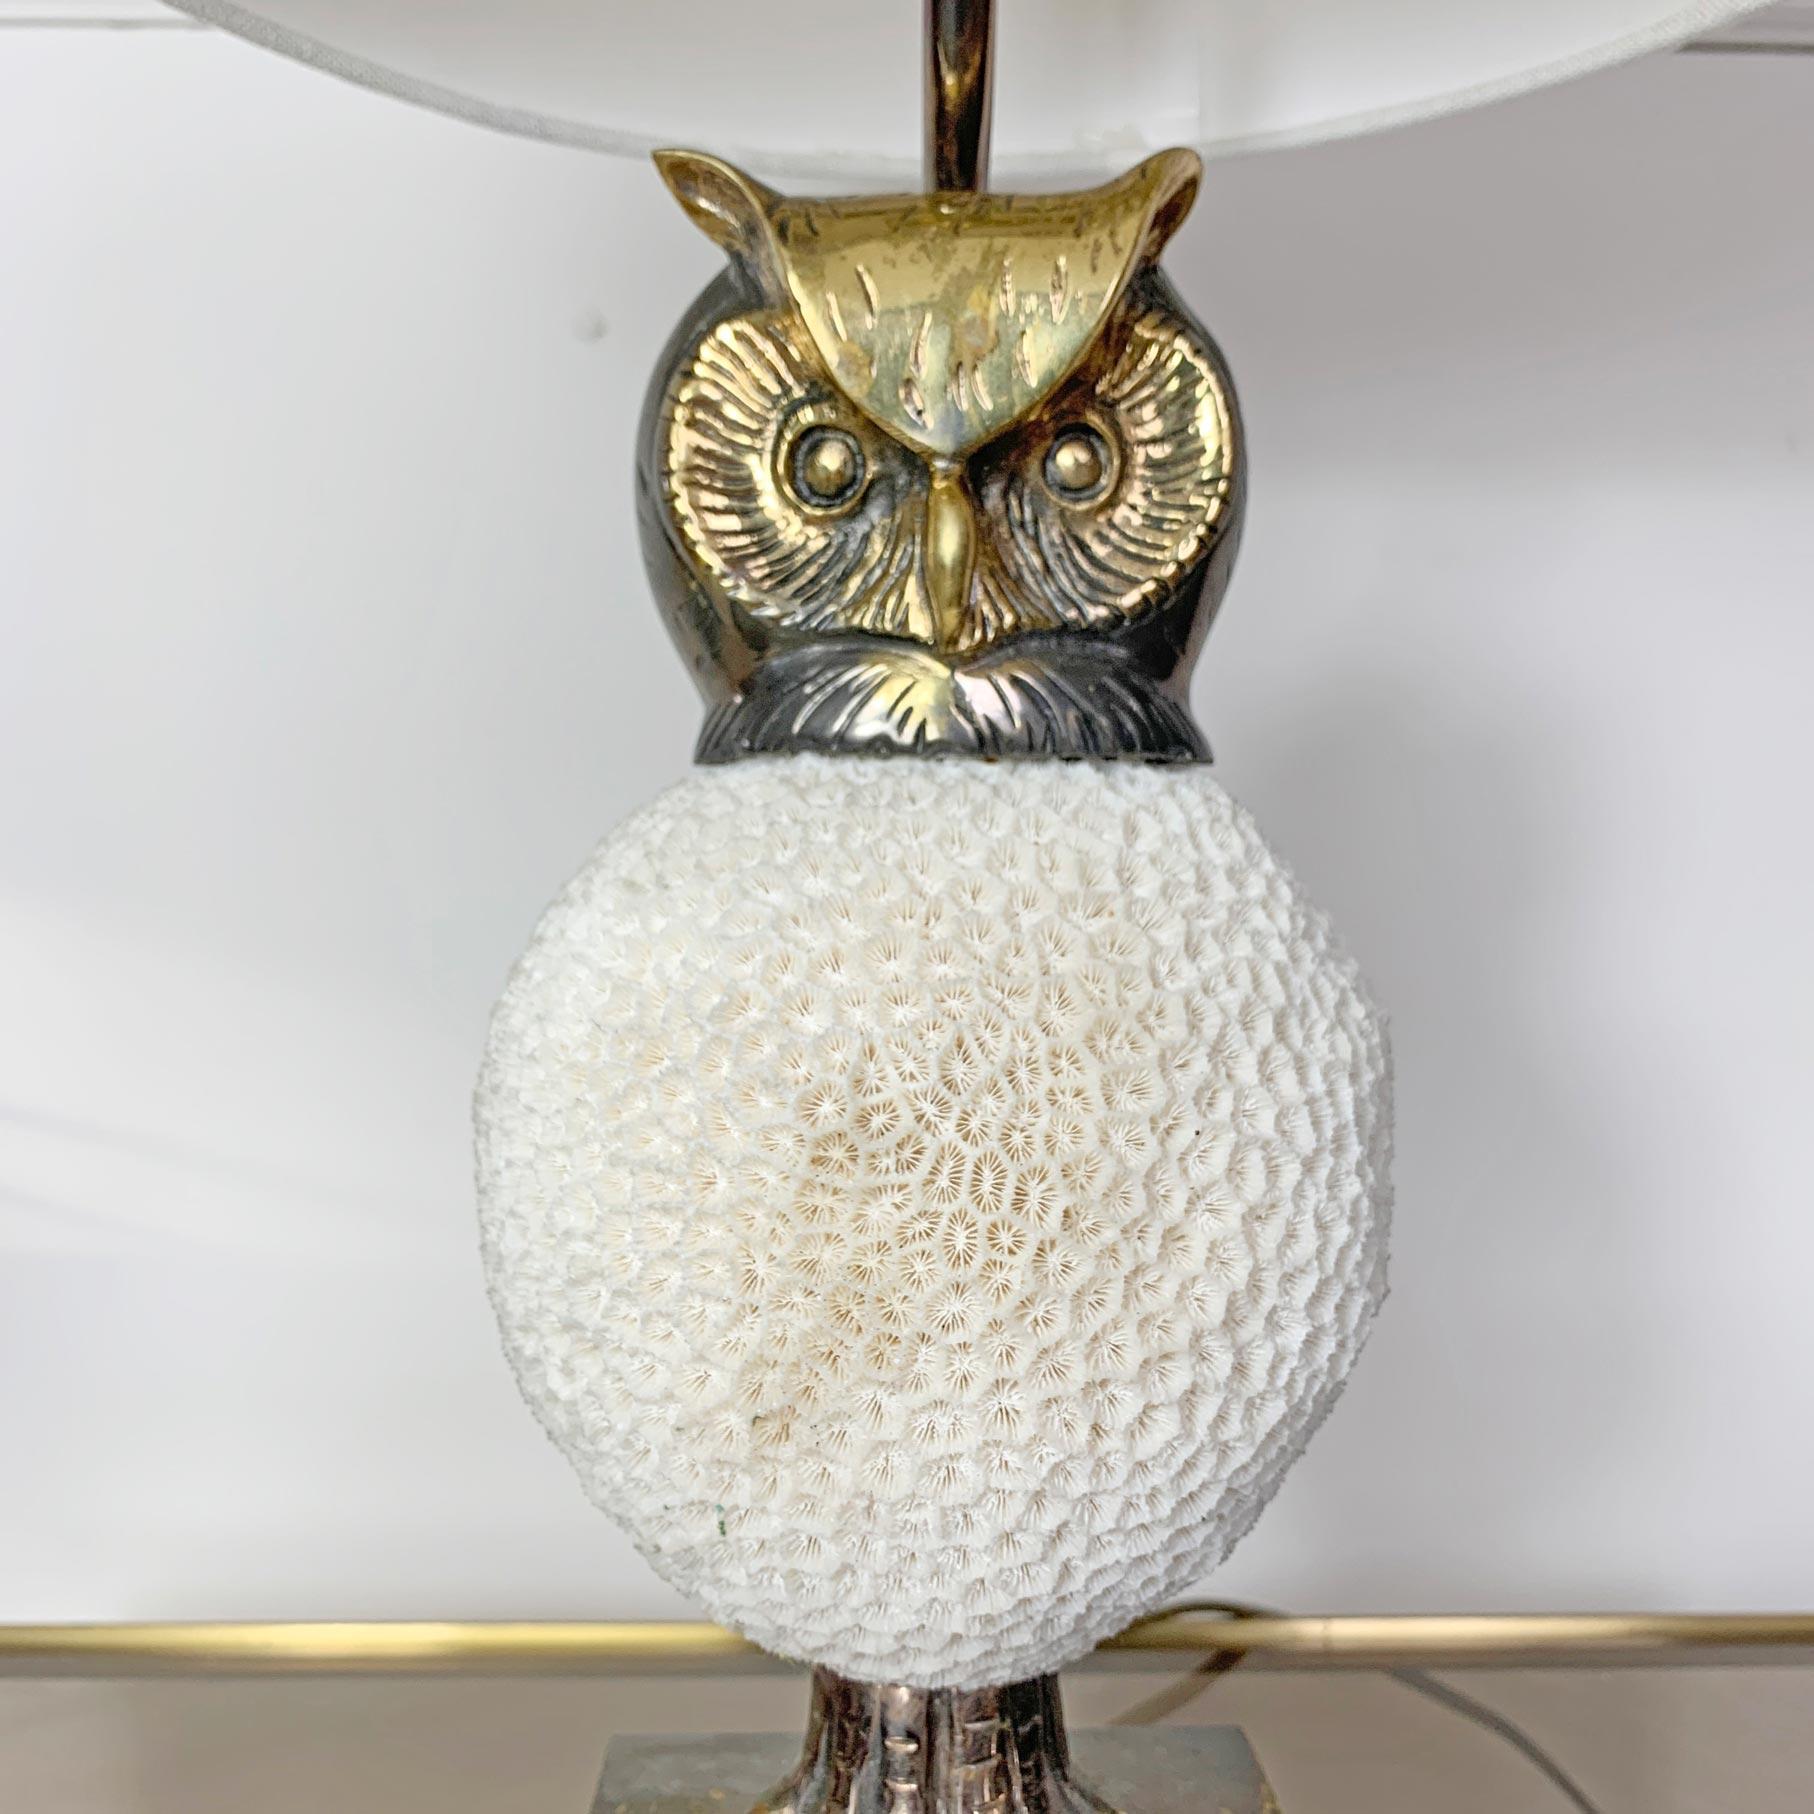 The coral owl lamp is an exceptionally rare and important piece of work made and signed by the pioneering Belgian artist Willy Daro
Dating from the 1970s
Comprising a body made from a single piece of natural coral with worked brass head and base
The